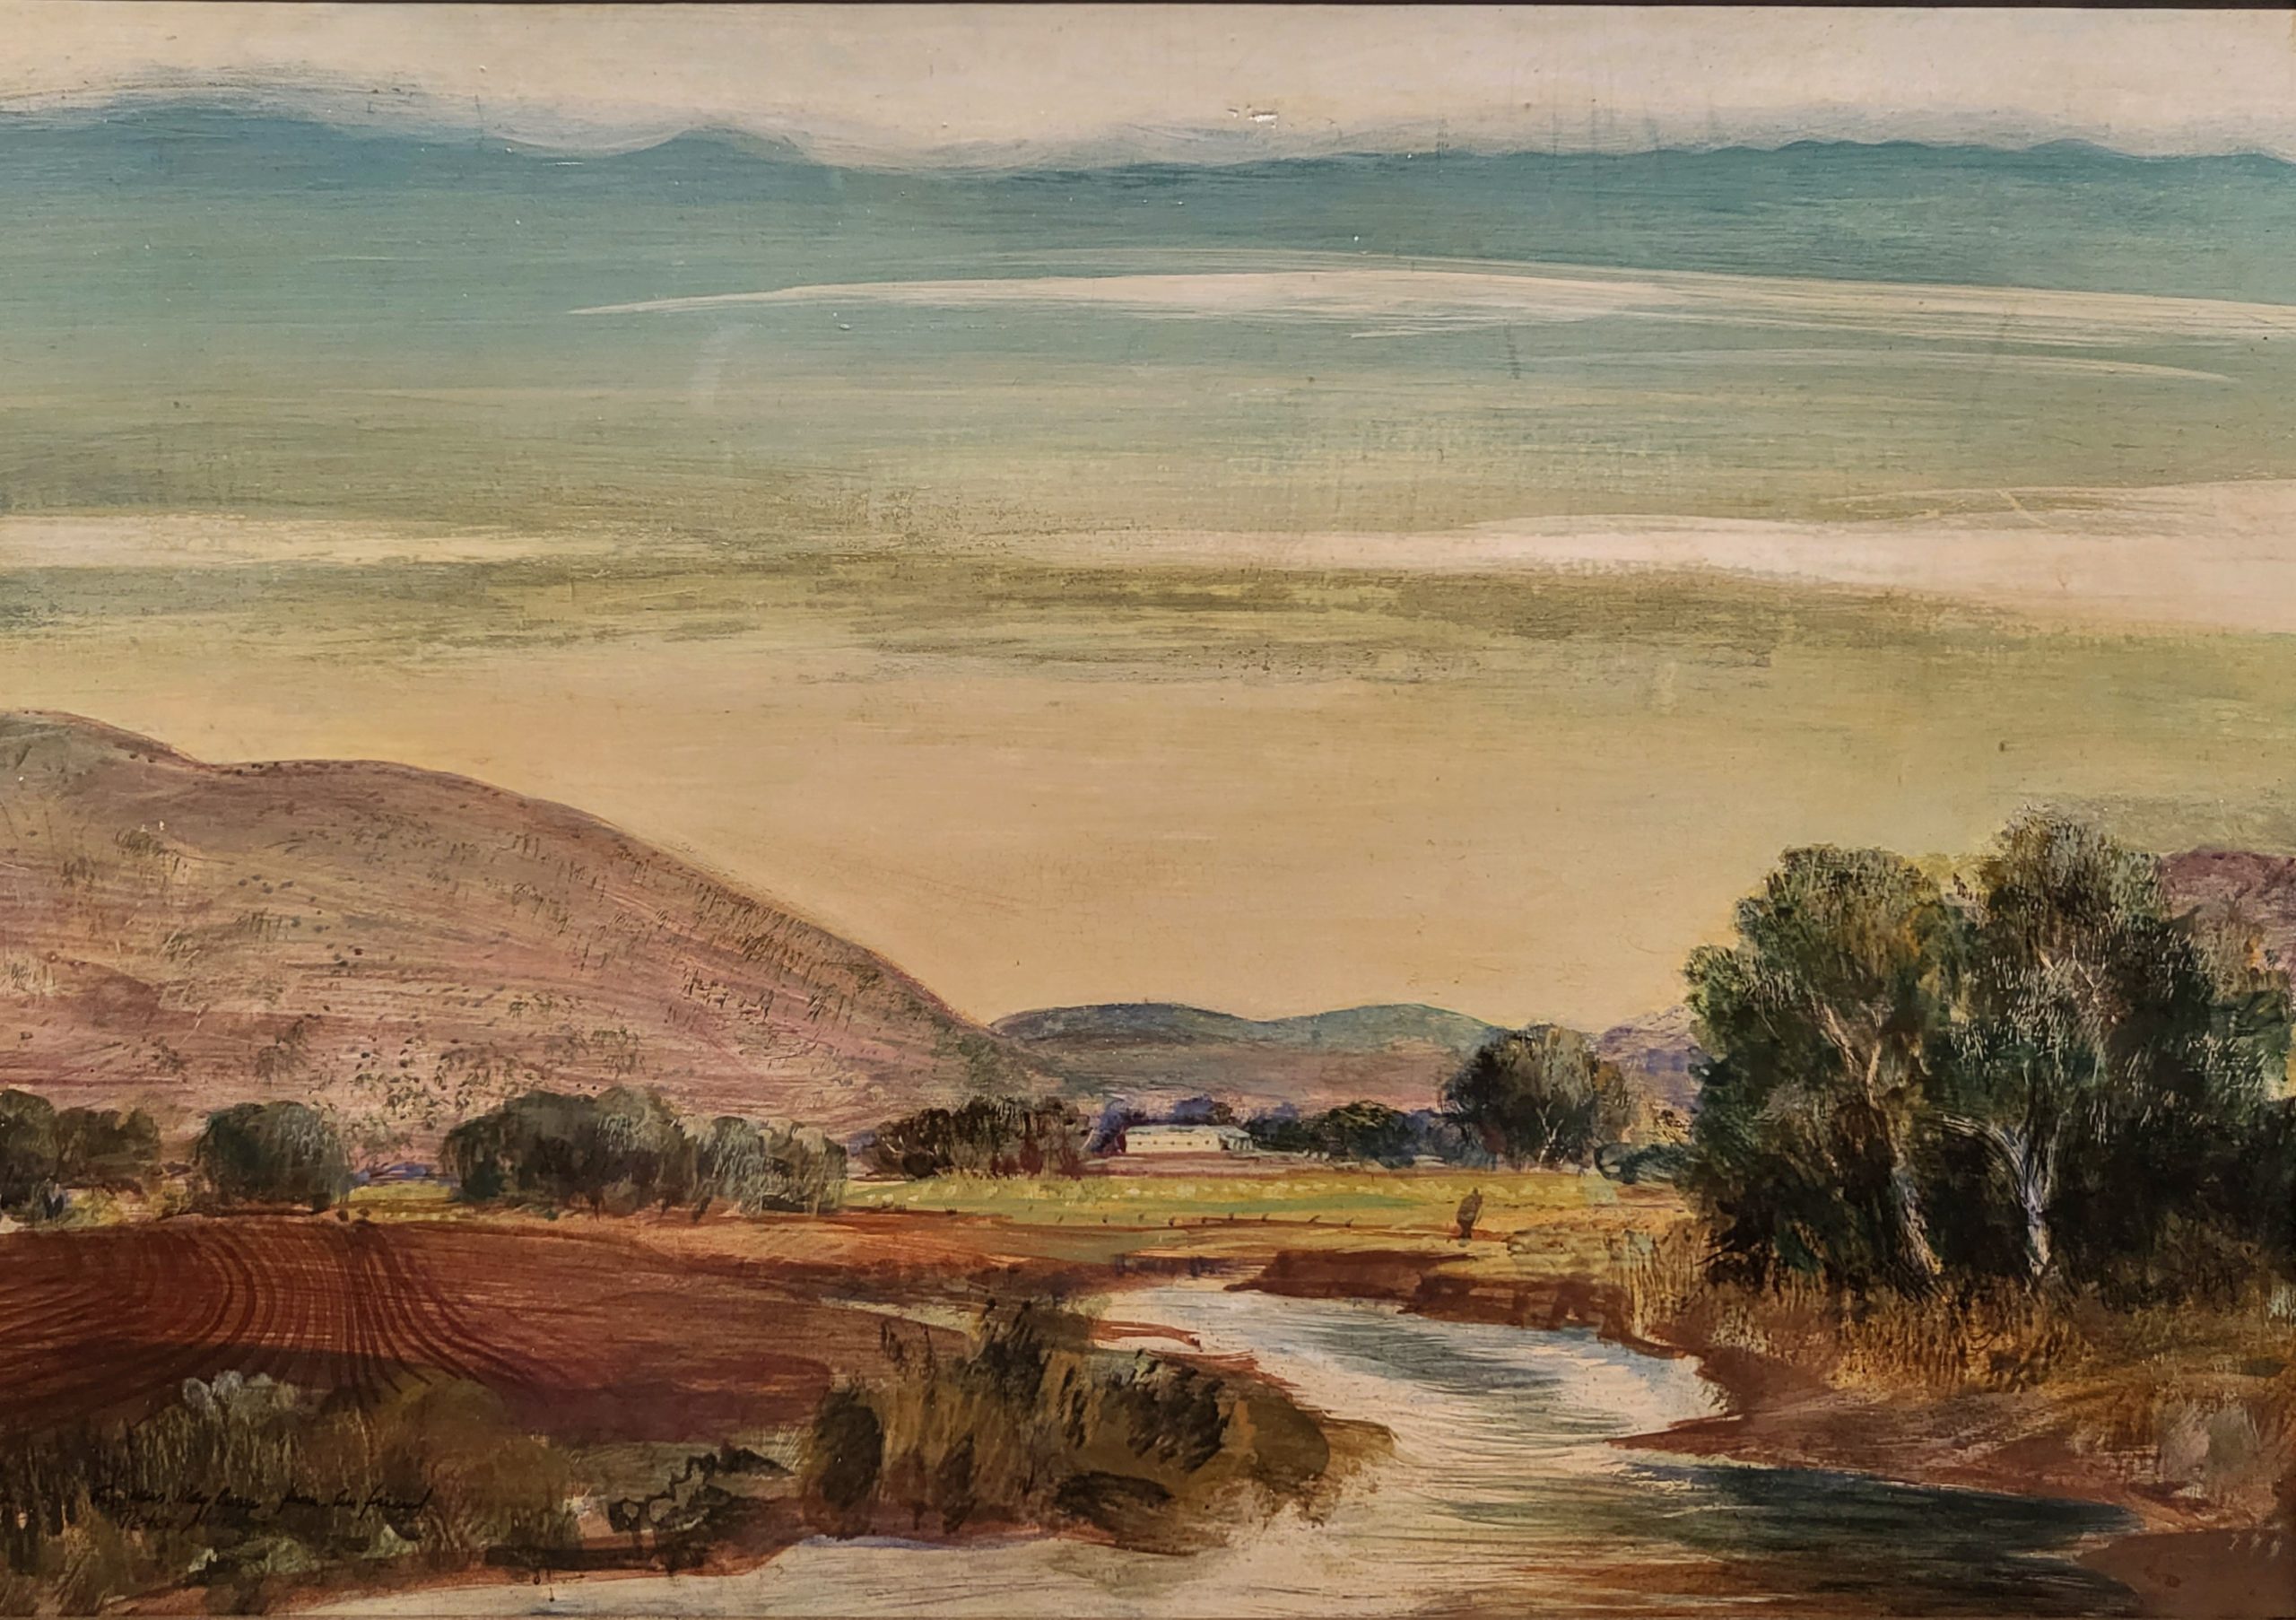 

											</b>

											<em>
												Lure of the West: Celebrating 50 Years of Gerald Peters Gallery  </em> 

											<h4>
												New York: April 29 - May 27, 2022											</h4>

		                																																<i>Peter Hurd, Hondo Valley in Summer,</i>  
																																																					egg tempera, 
																																								13 3/4 x 18 3/4 inches 
																								
		                				